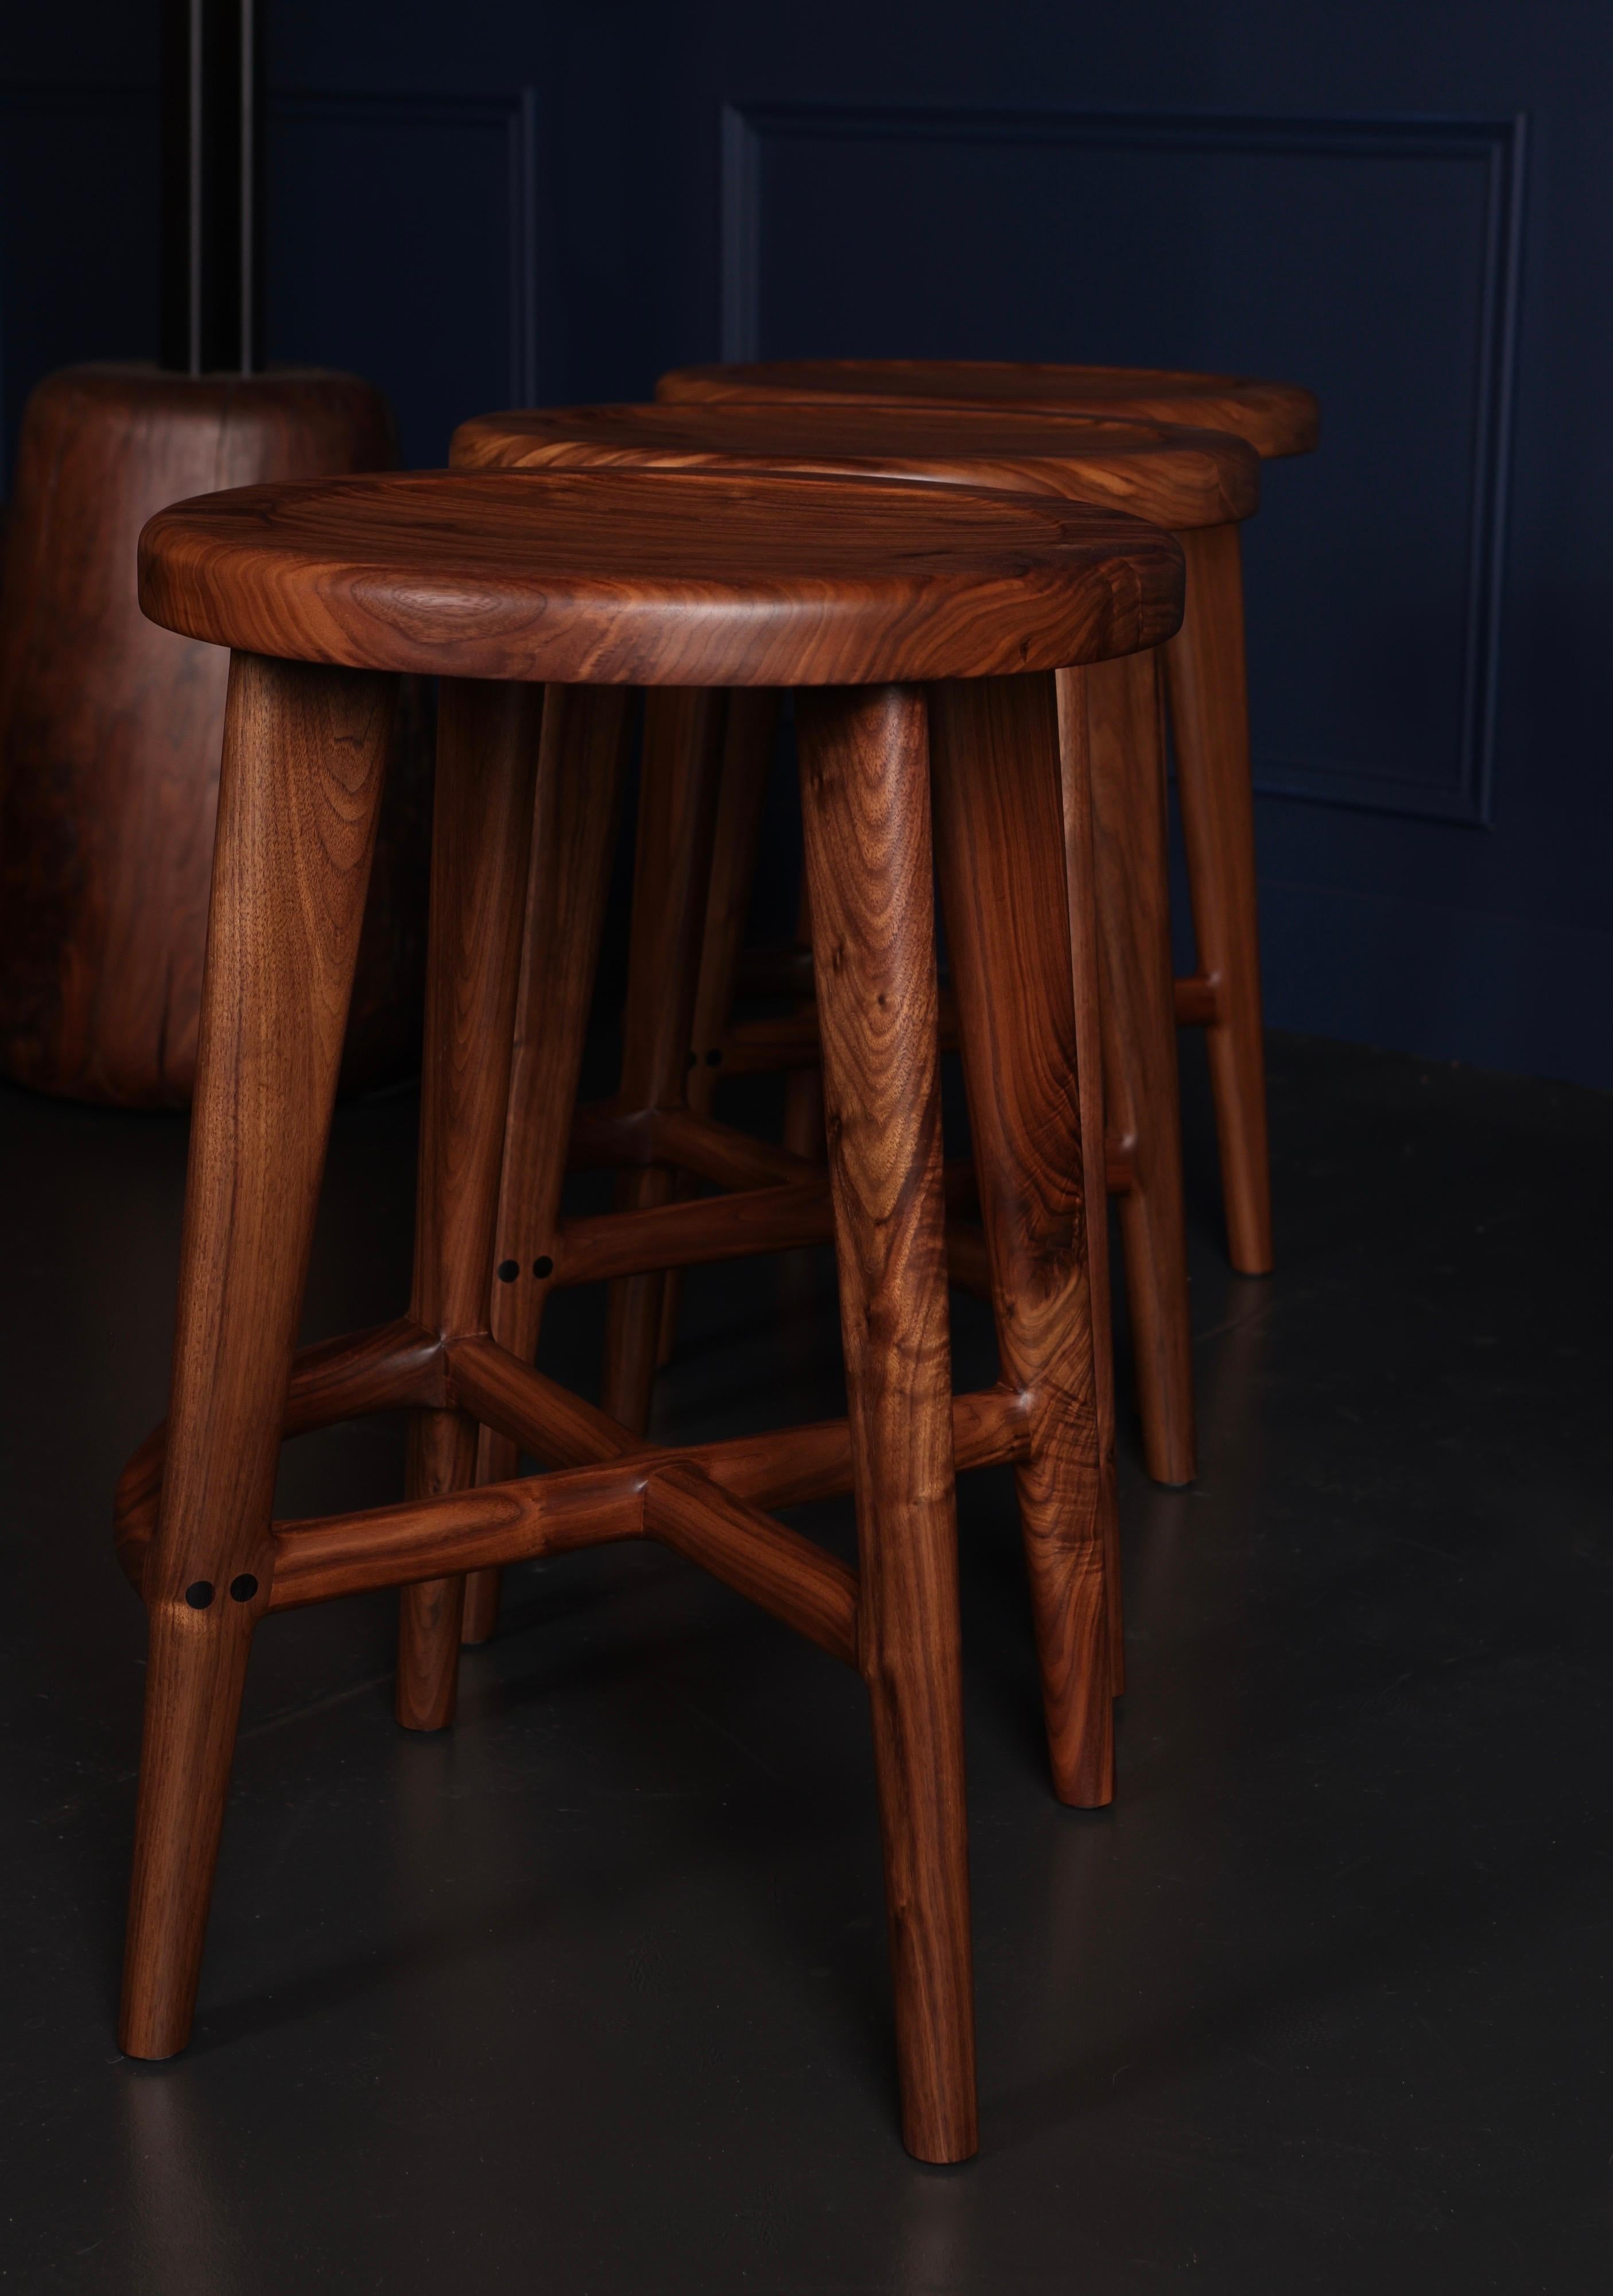 American Craftsman Handcrafted Solid Wood Bar or Counter Stools, Walnut - (Set of 2) Ready to Ship For Sale